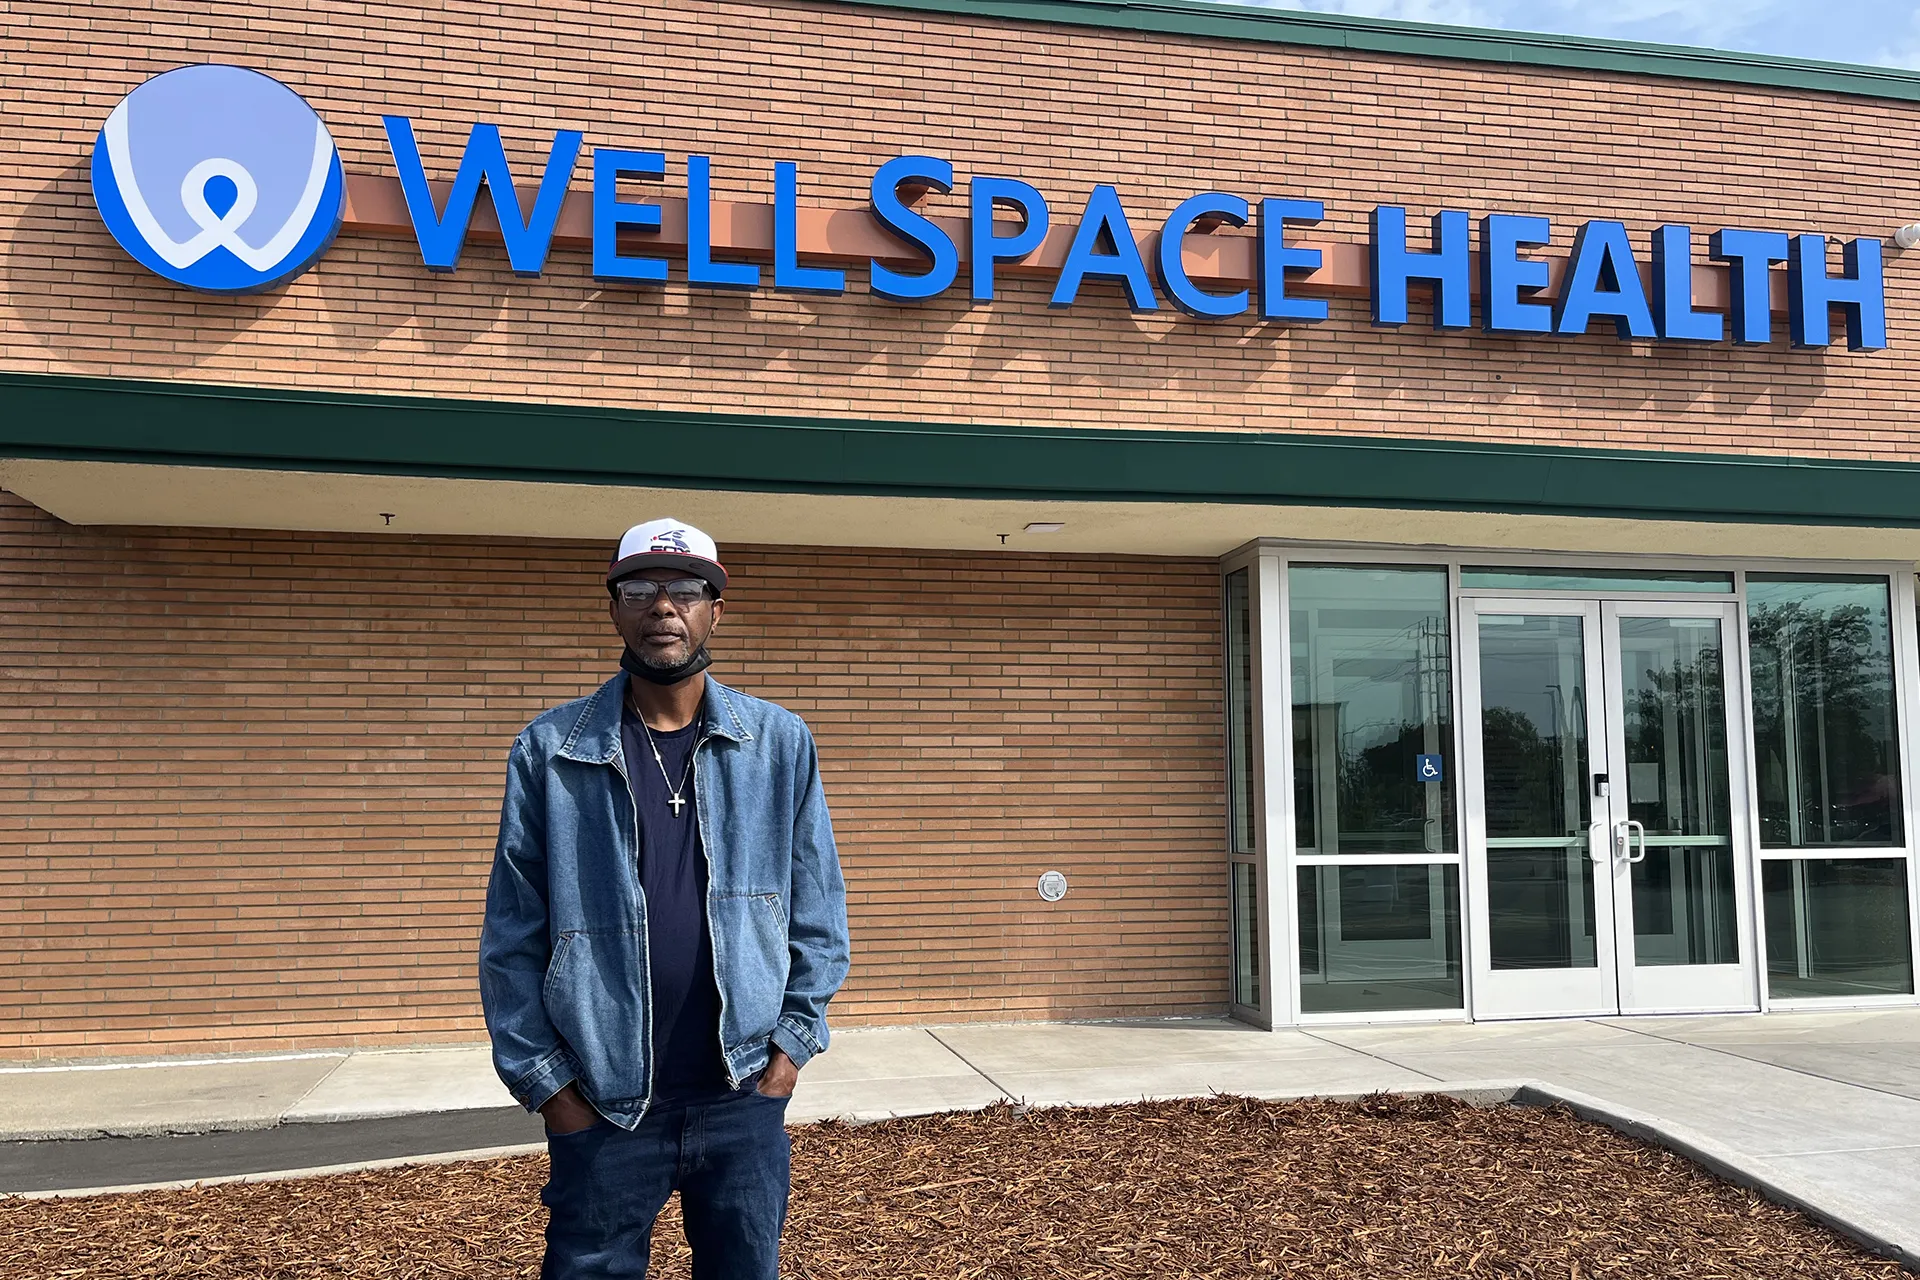 Man standing in front of Wellspace Health building